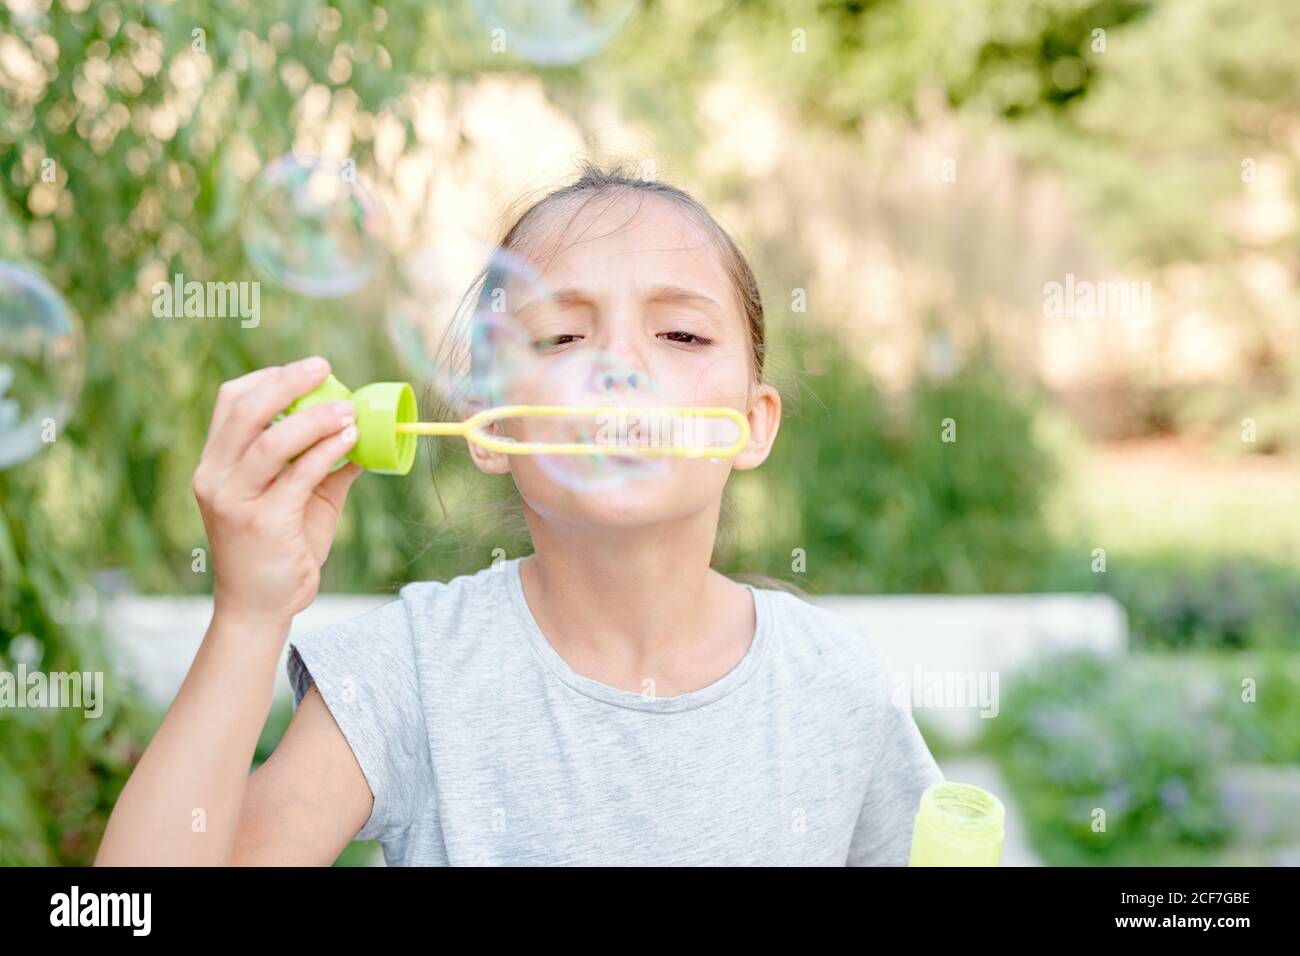 Medium close-up portrait of girl having fun inflating soap bubbles on summer day Stock Photo